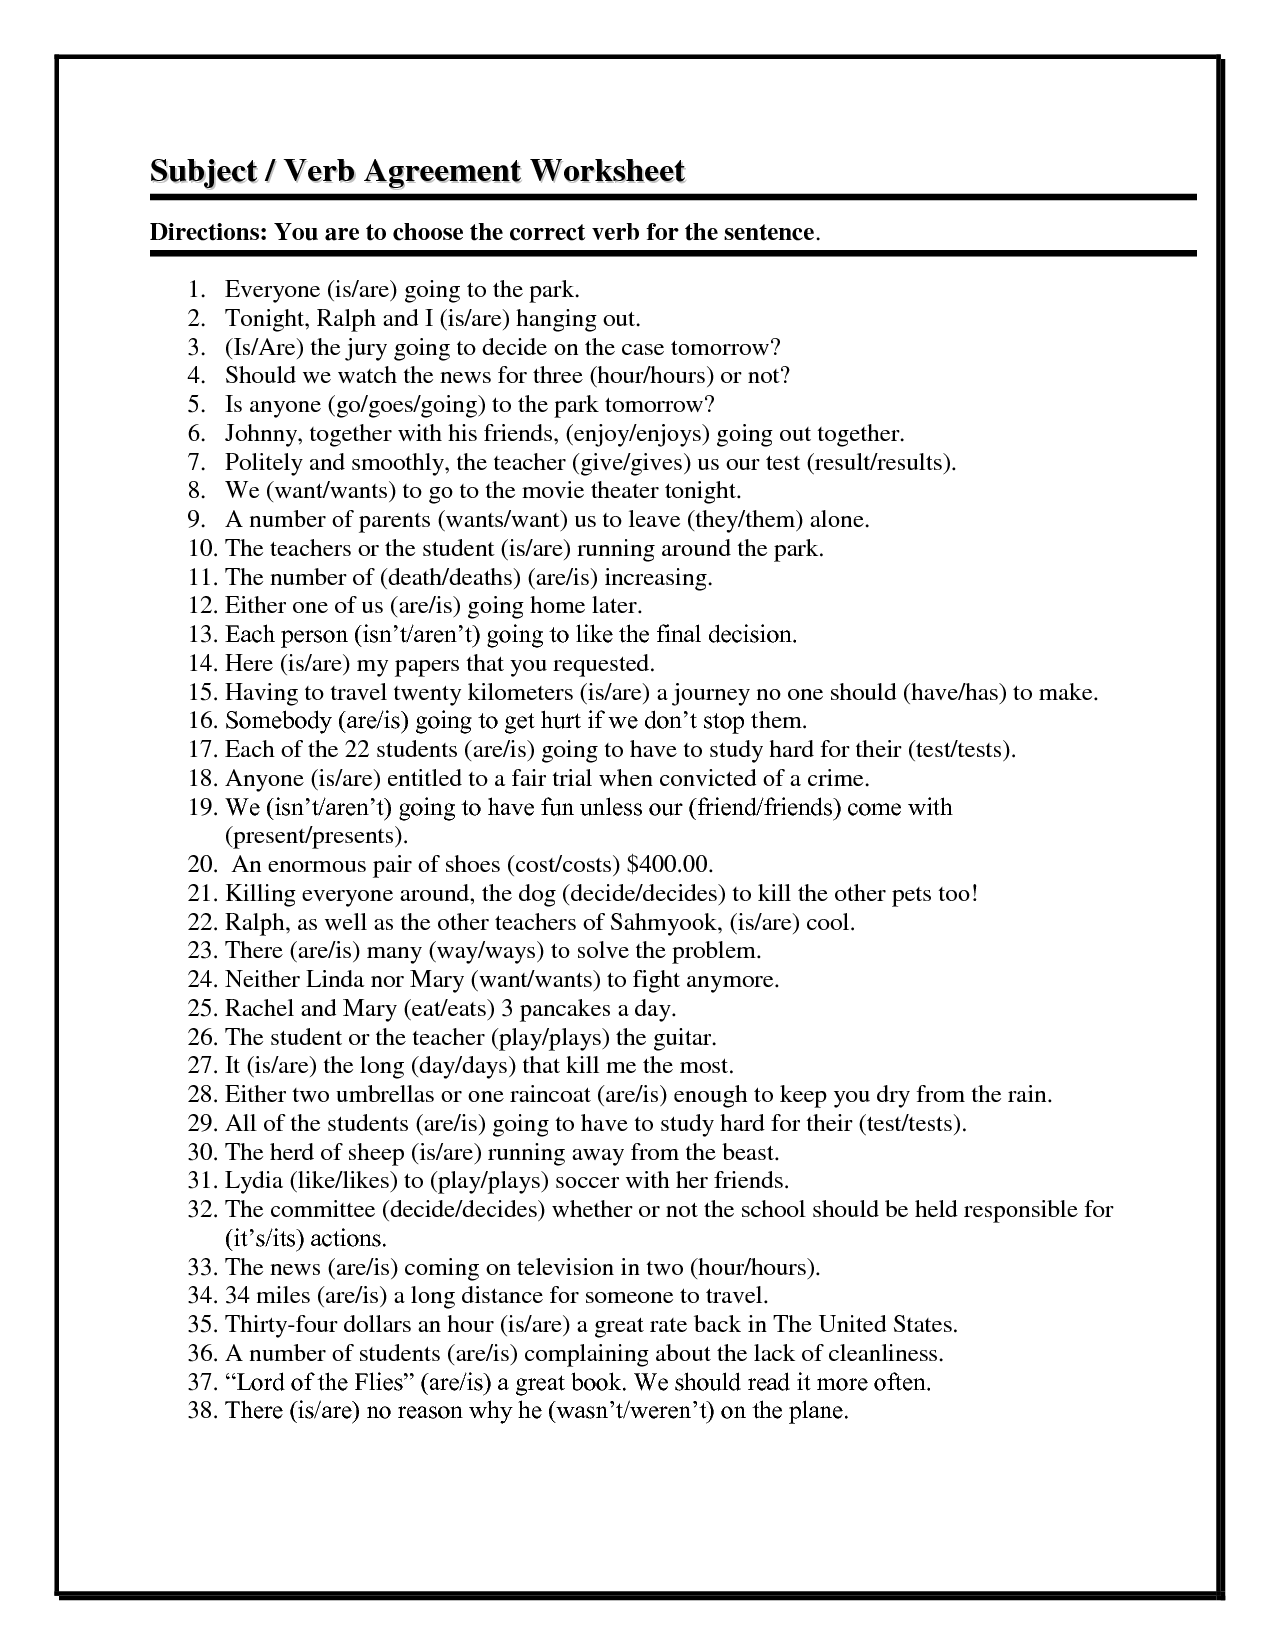 Subject And Verb Agreement Practice Worksheets